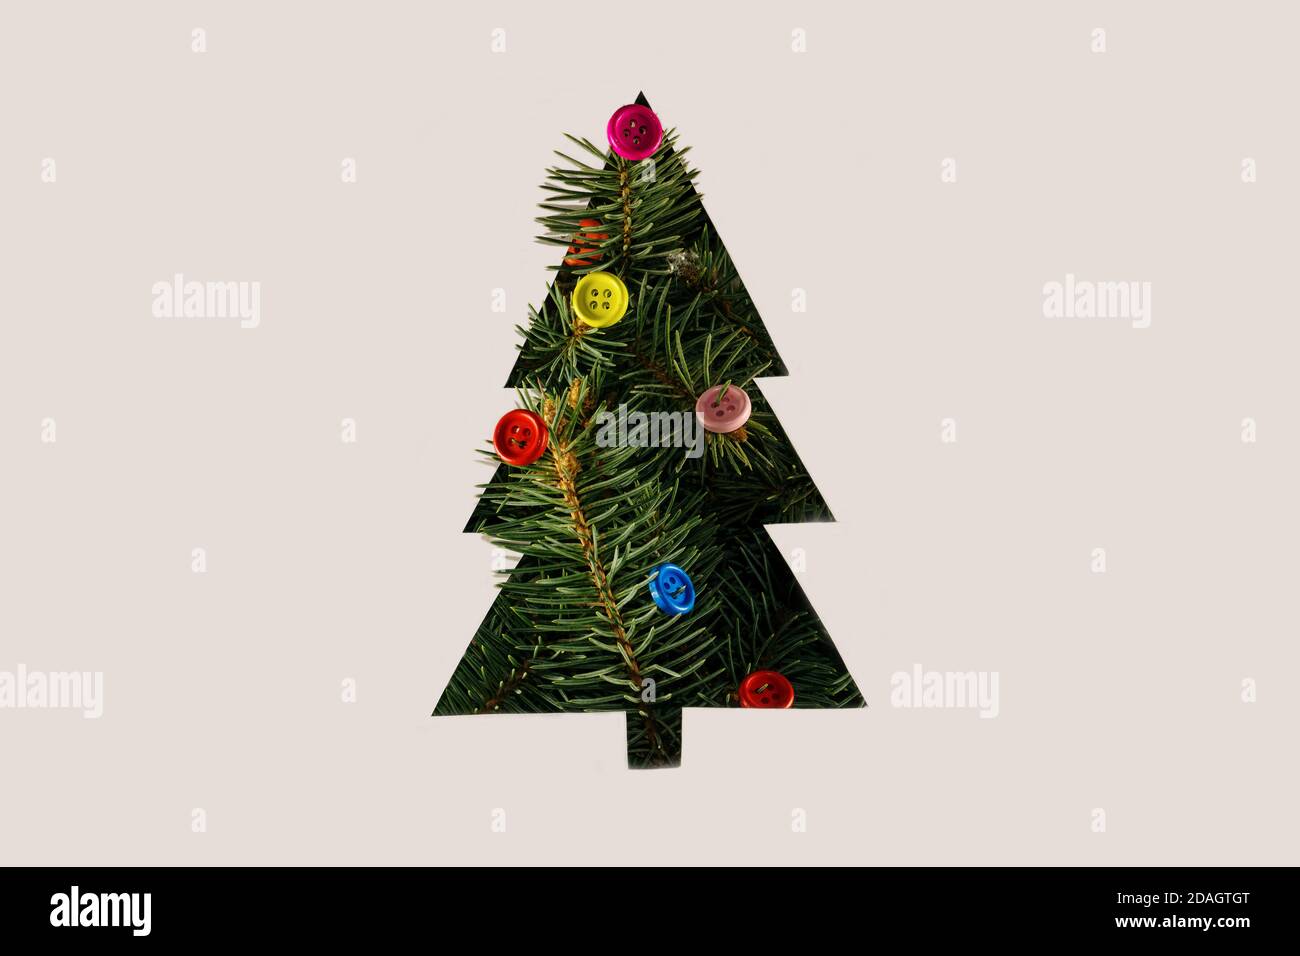 Negative space Christmas tree concept with Christmas tree branches and colorful buttons Stock Photo